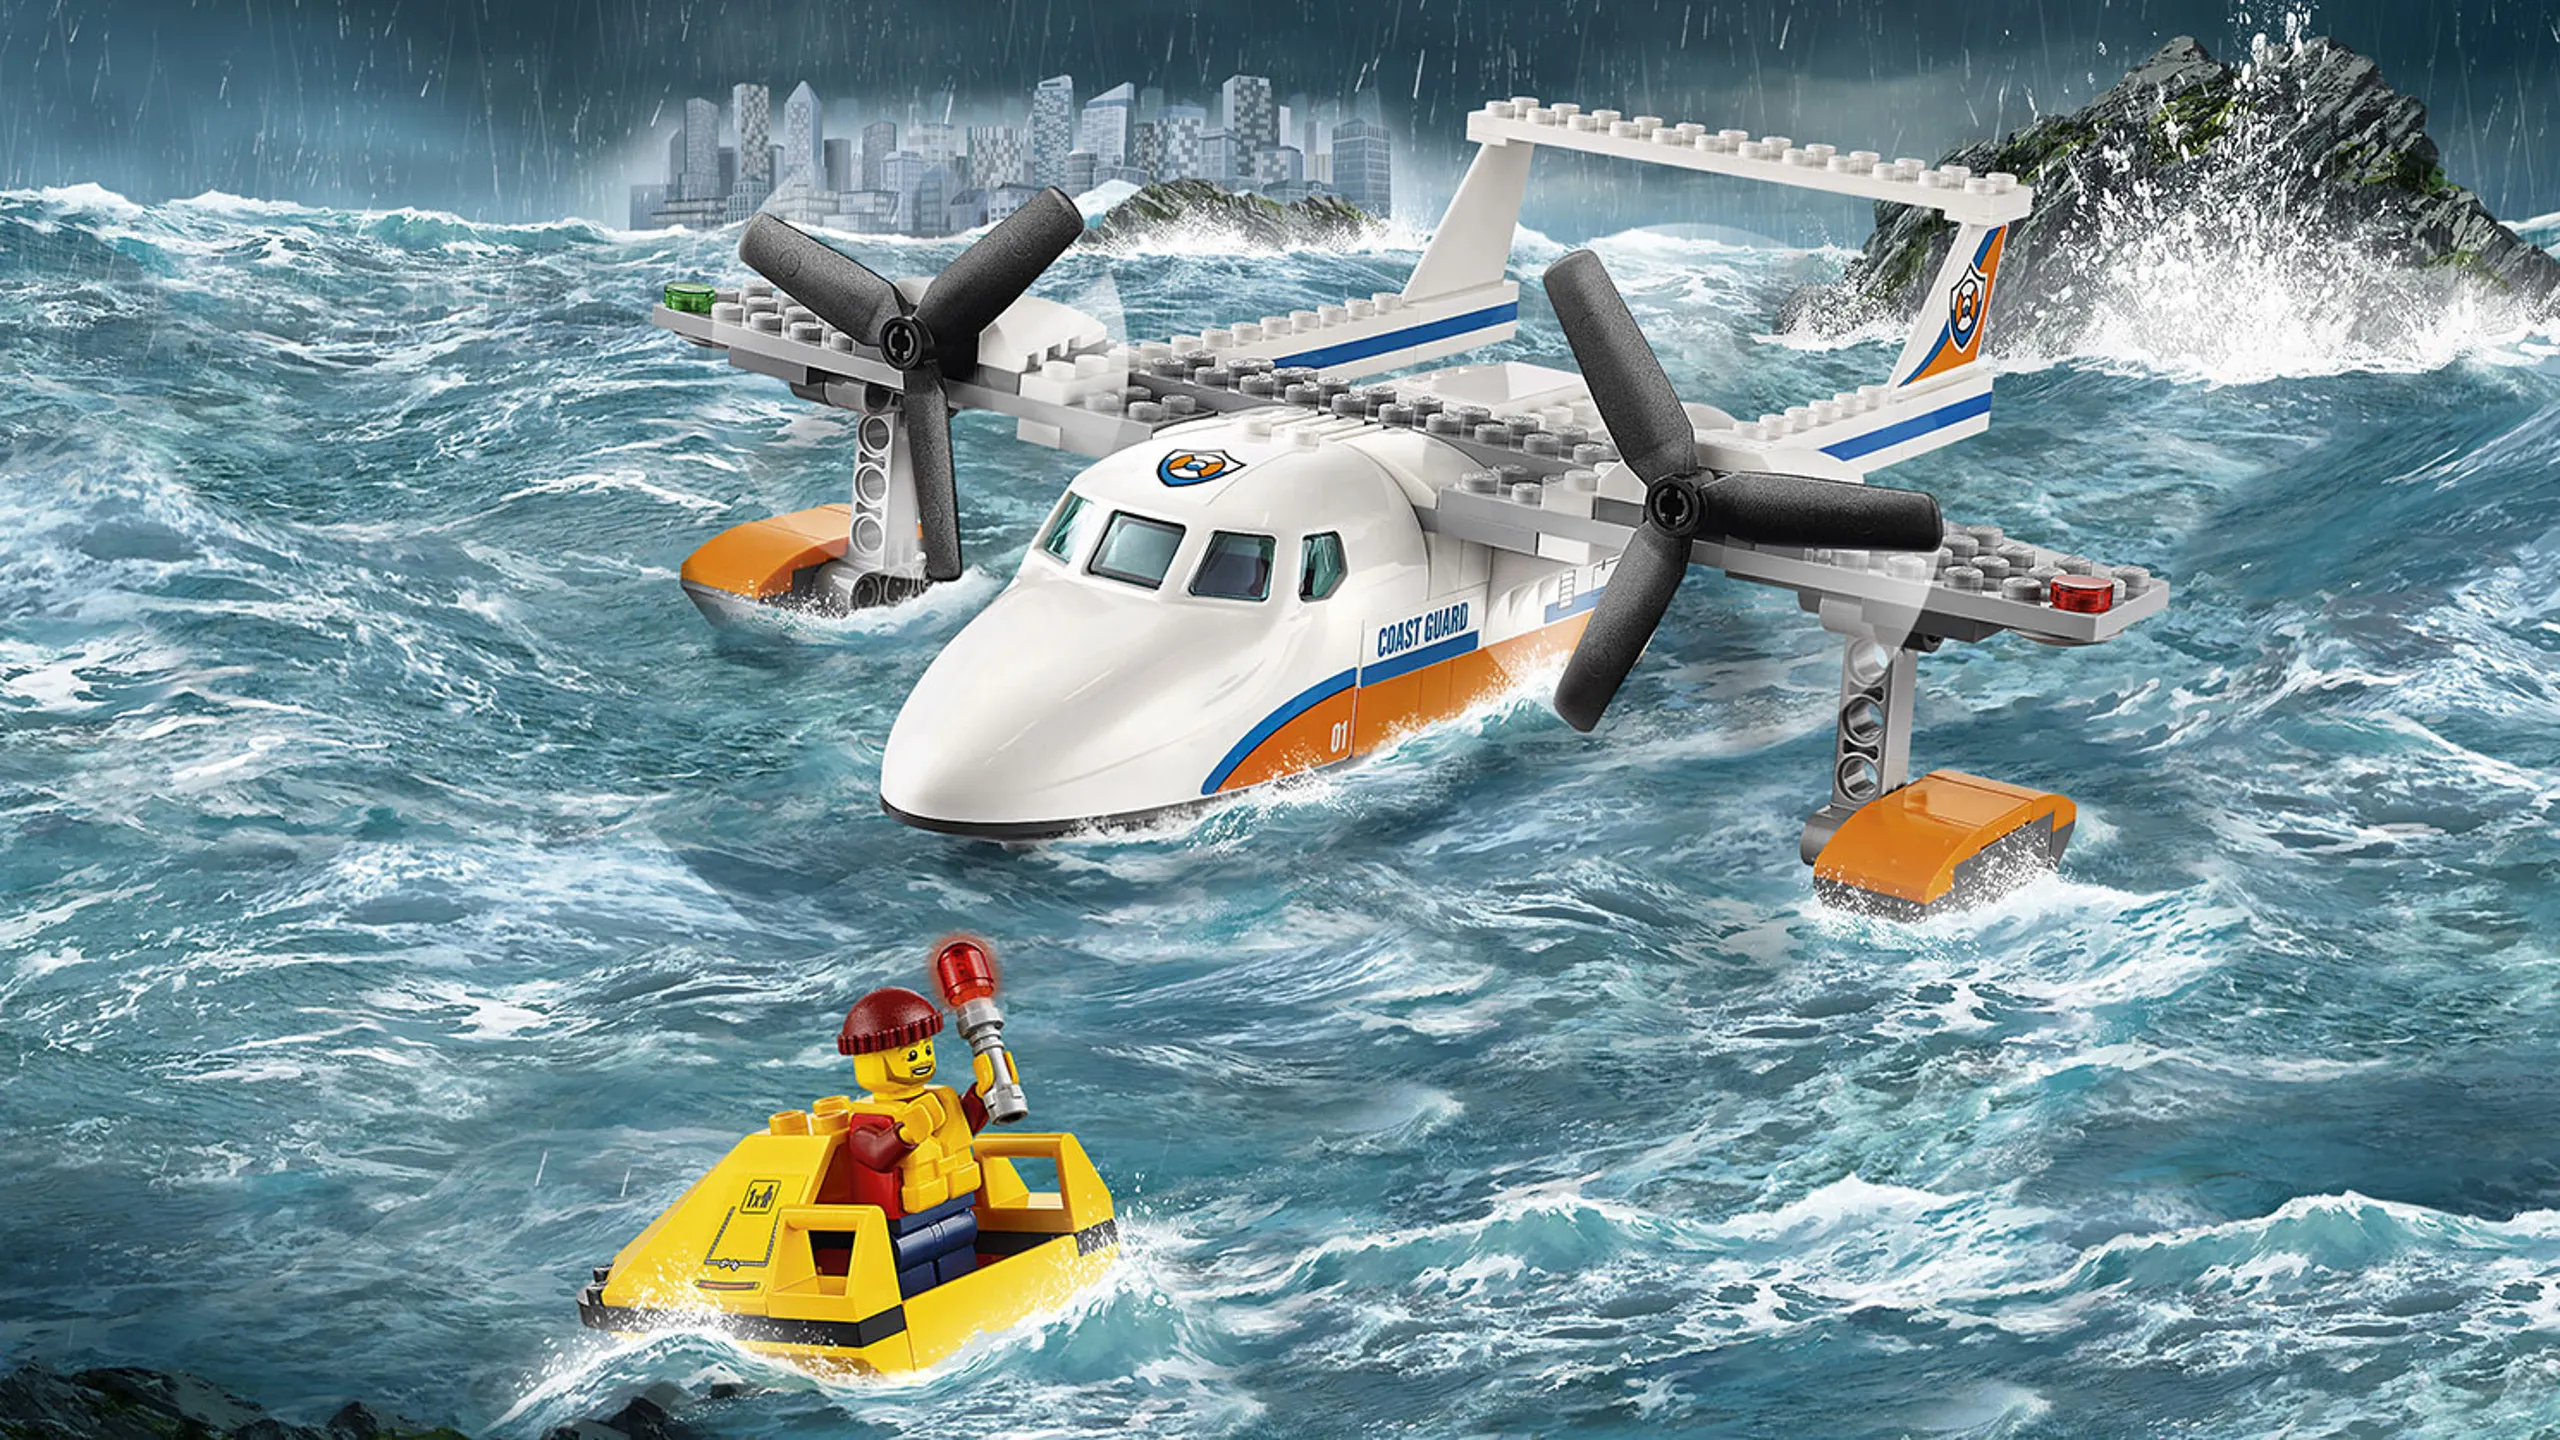 LEGO City Coast Guard - 60164 Sea Rescue Plane - A sailor is in distress in a rescue raft at sea! You must hop into the cockpit and save him.